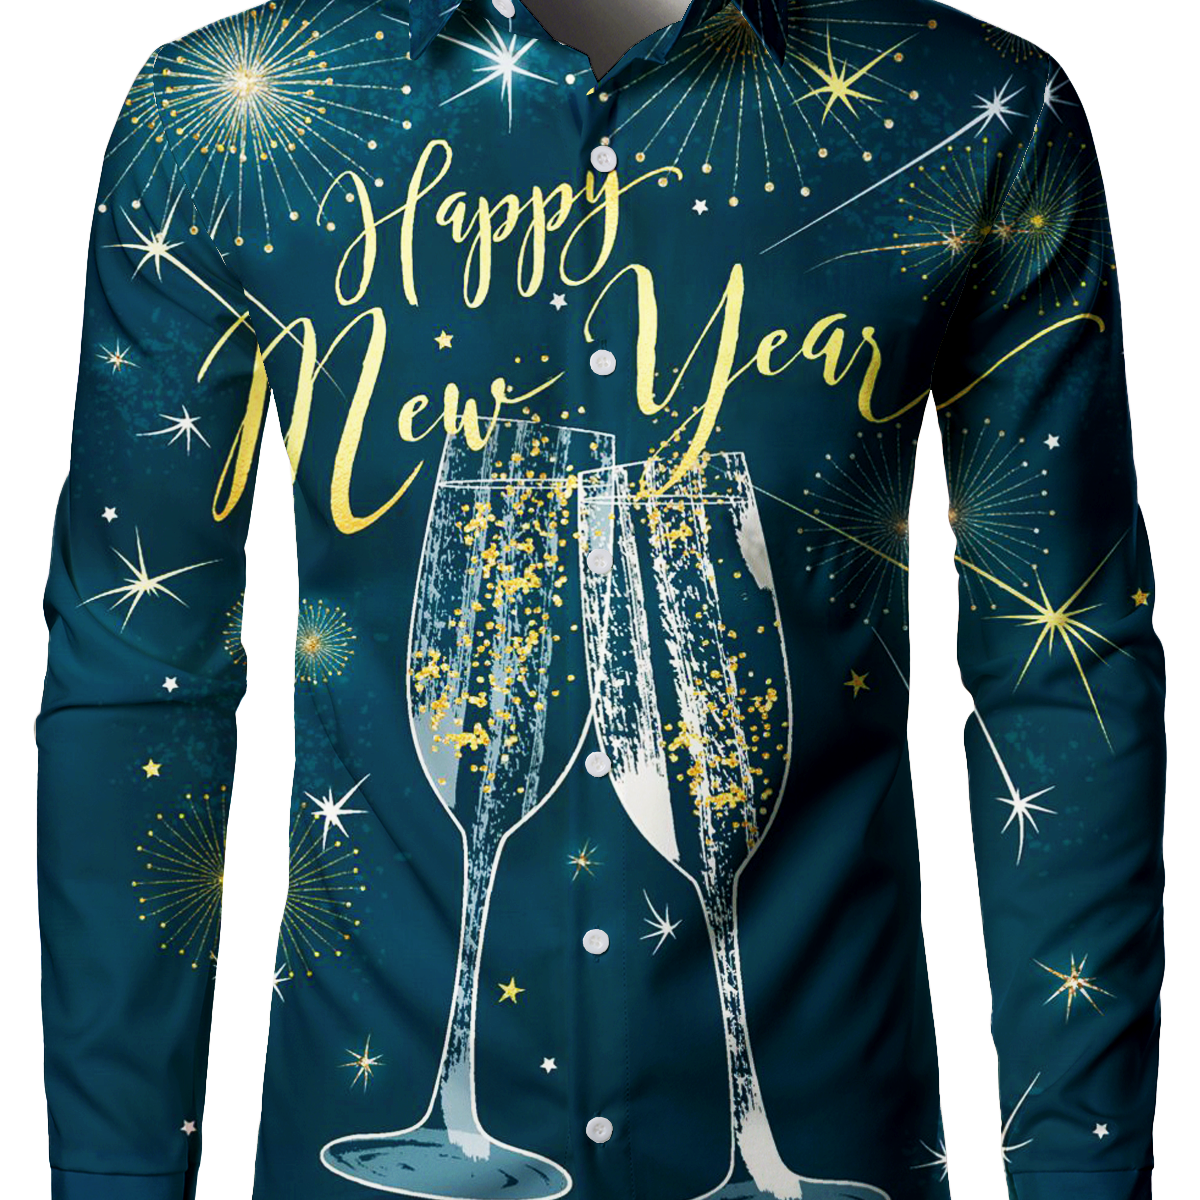 Chemise à manches longues bleue pour hommes Happy New Year's Eve Festival Fireworks Holiday Print